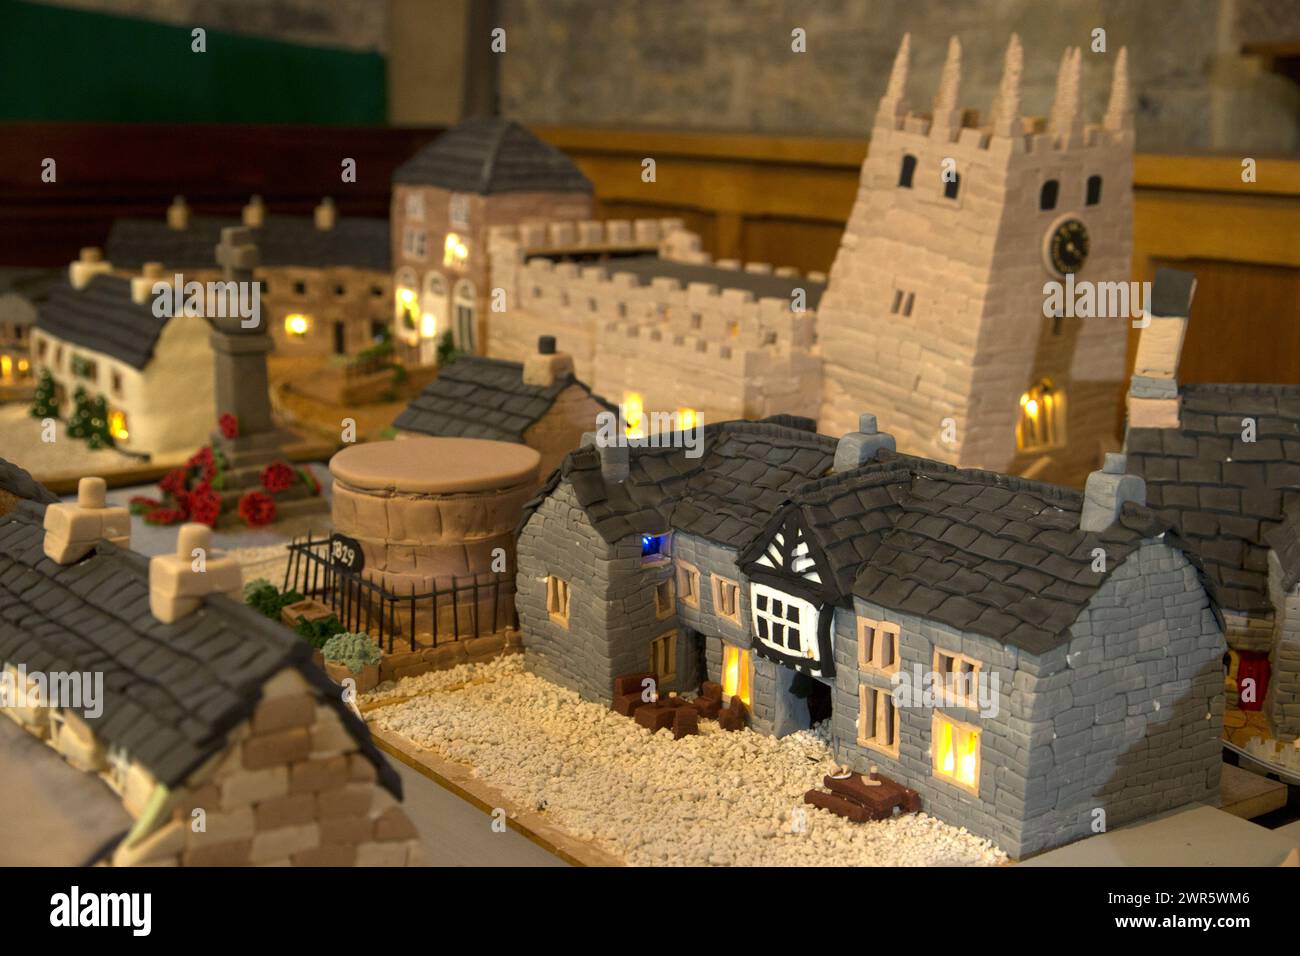 07/12/16  Cake Village  In this incredibly detailed replica of a small Peak District village, everything is edible, from the baubles on the Christmas Stock Photo